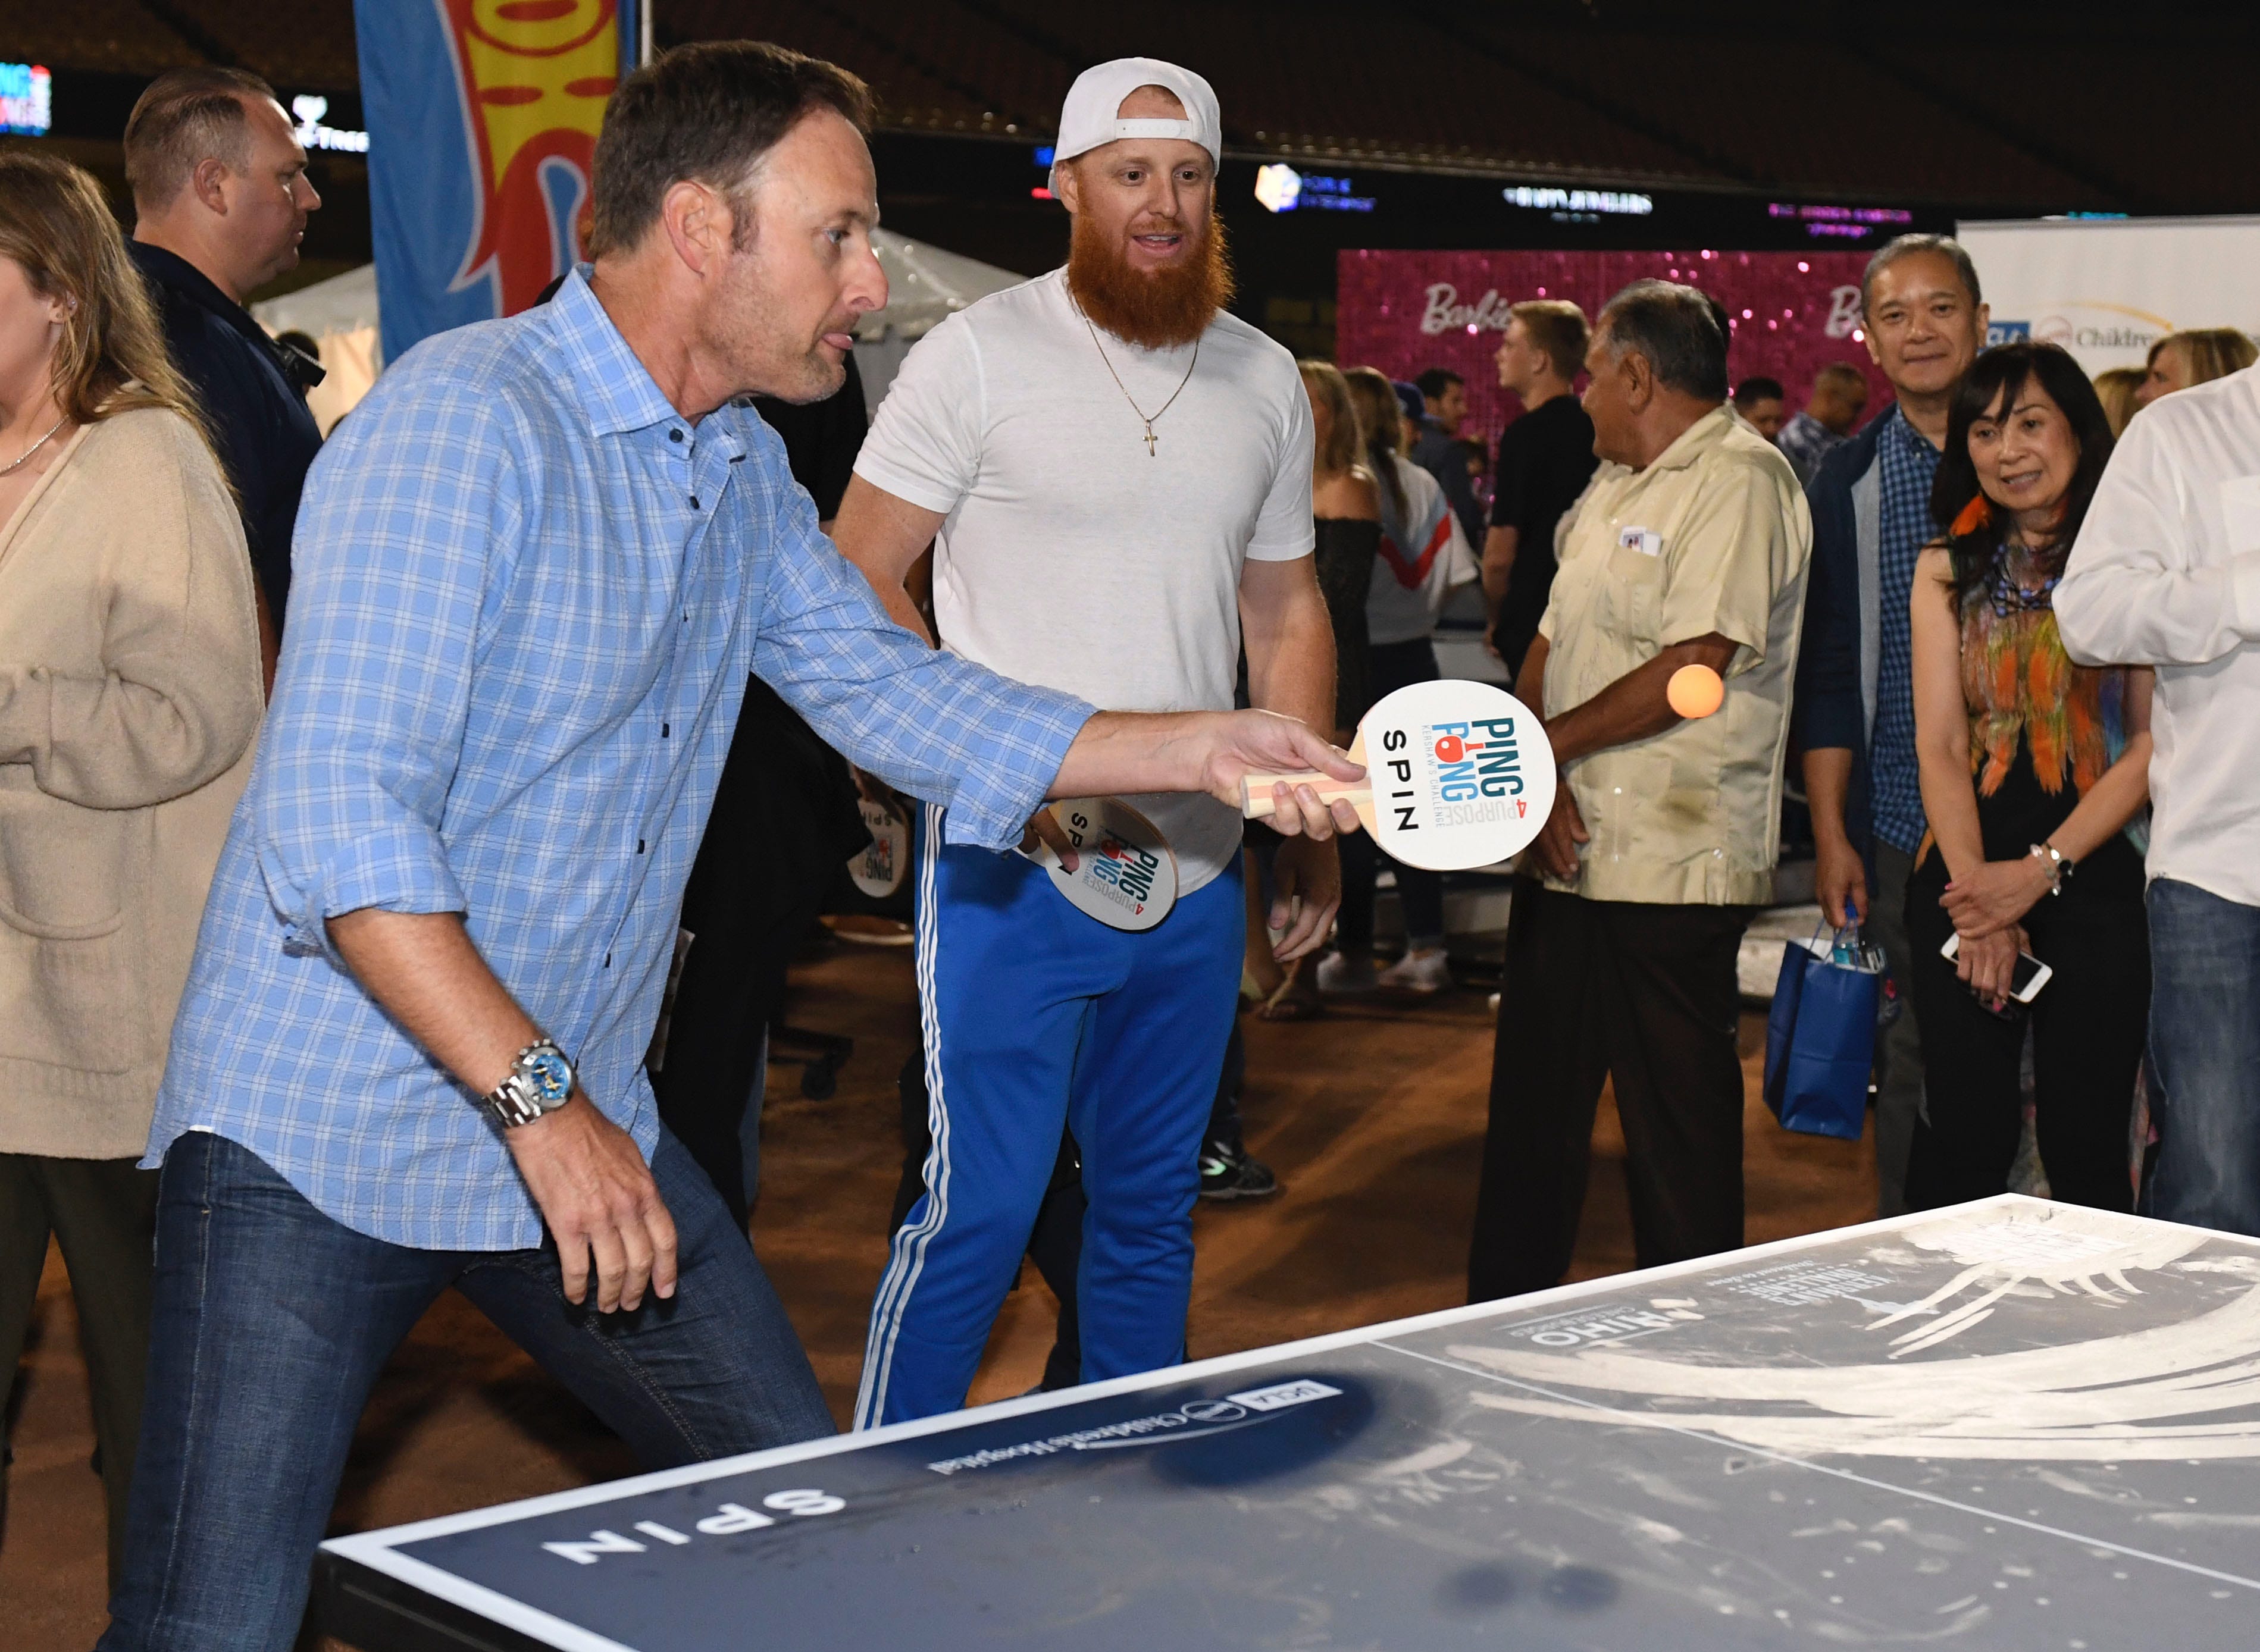 10th annual Ping Pong 4 Purpose celebrity tournament in Los Angeles, Calif.  – New York Daily News